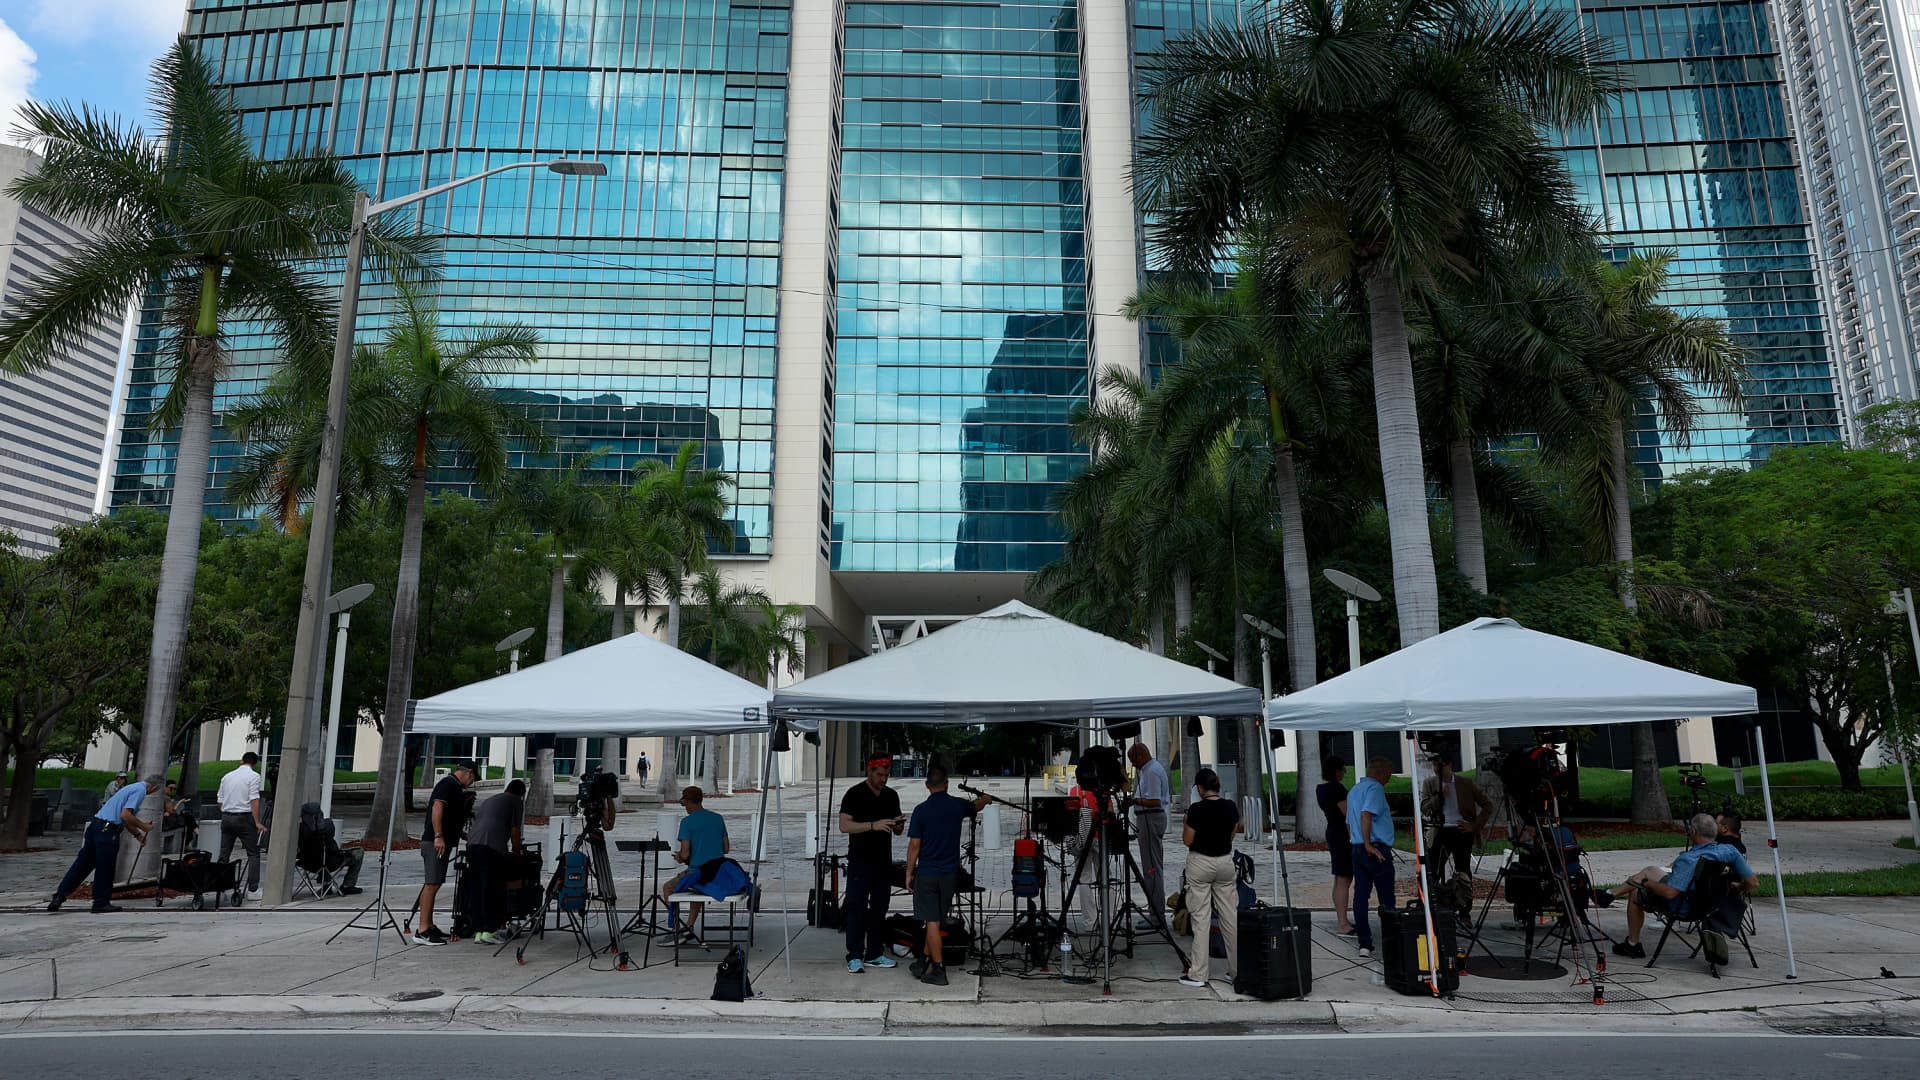 The Wilkie D. Ferguson Jr. United States Federal Courthouse where Taylor Budowich, a former spokesman for former U.S. President Donald Trump, appeared before a grand jury is seen on June 07, 2023 in Miami, Florida.